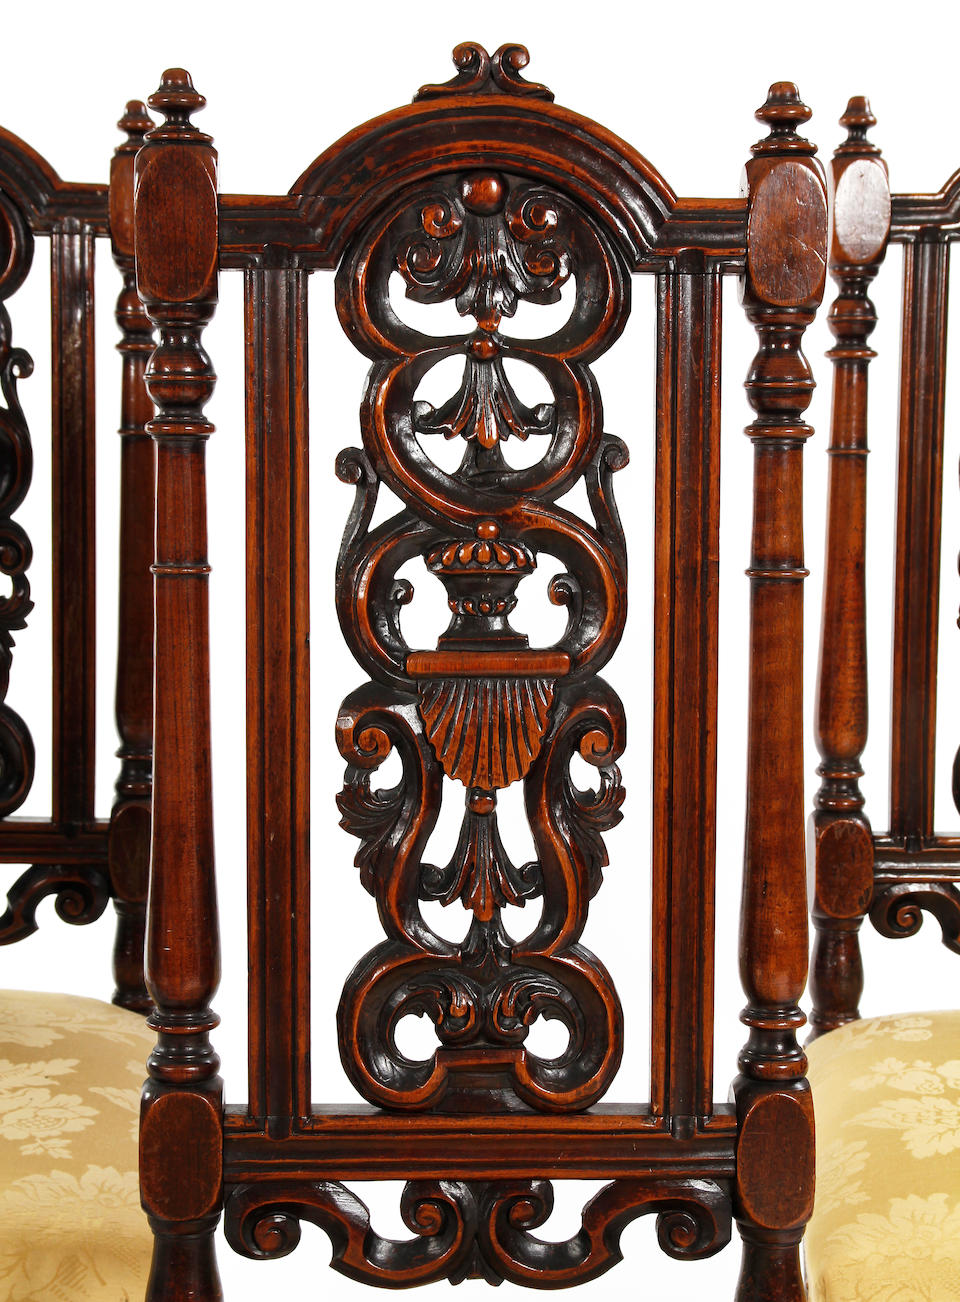 A set of six North European walnut high-back dining chairs 19th century, after Daniel Marot